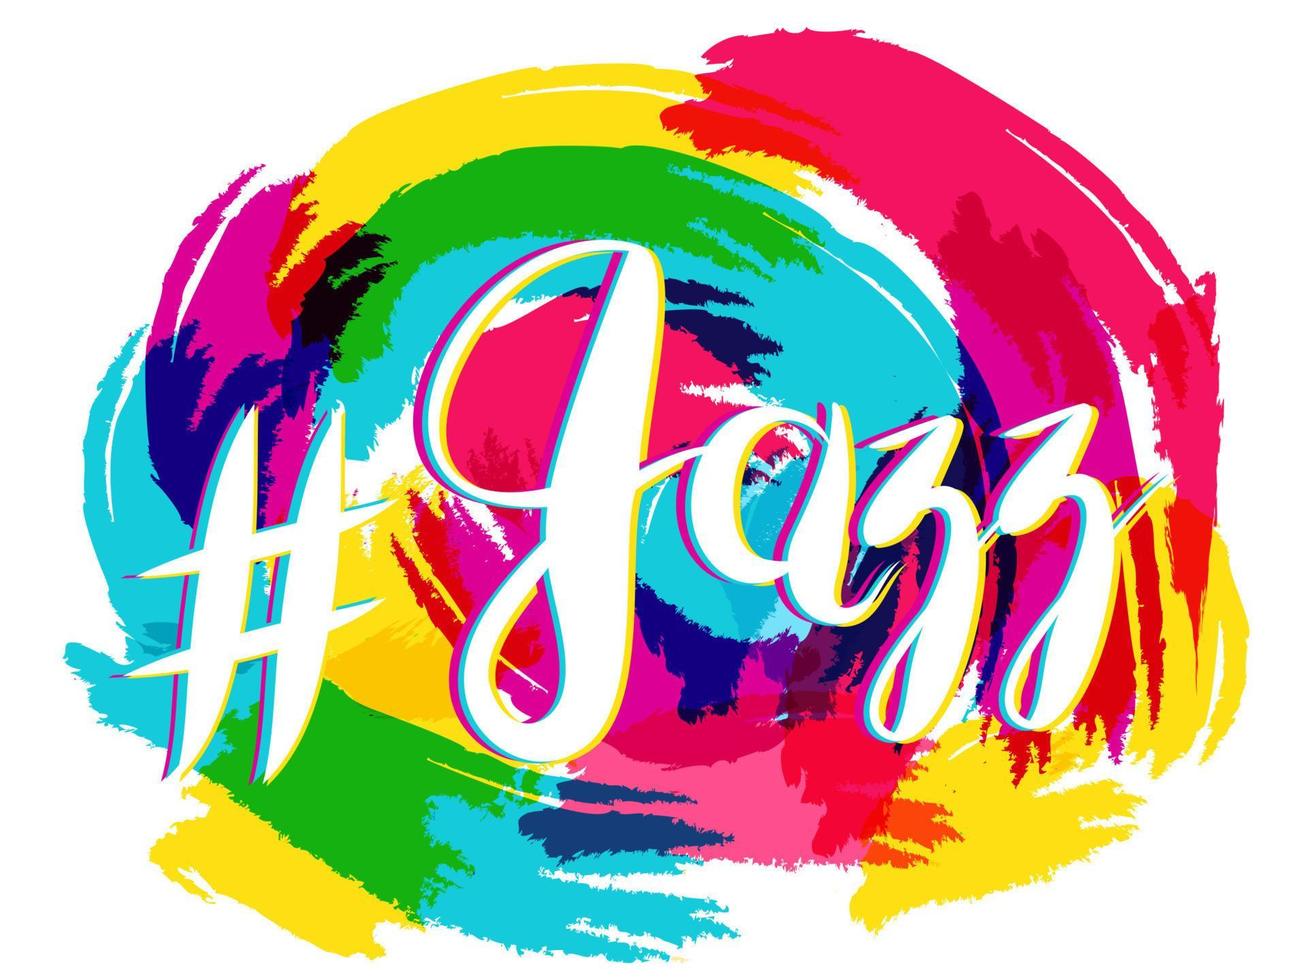 Hashtag Jazz Lettering on Spot Background, yellow and blue vector